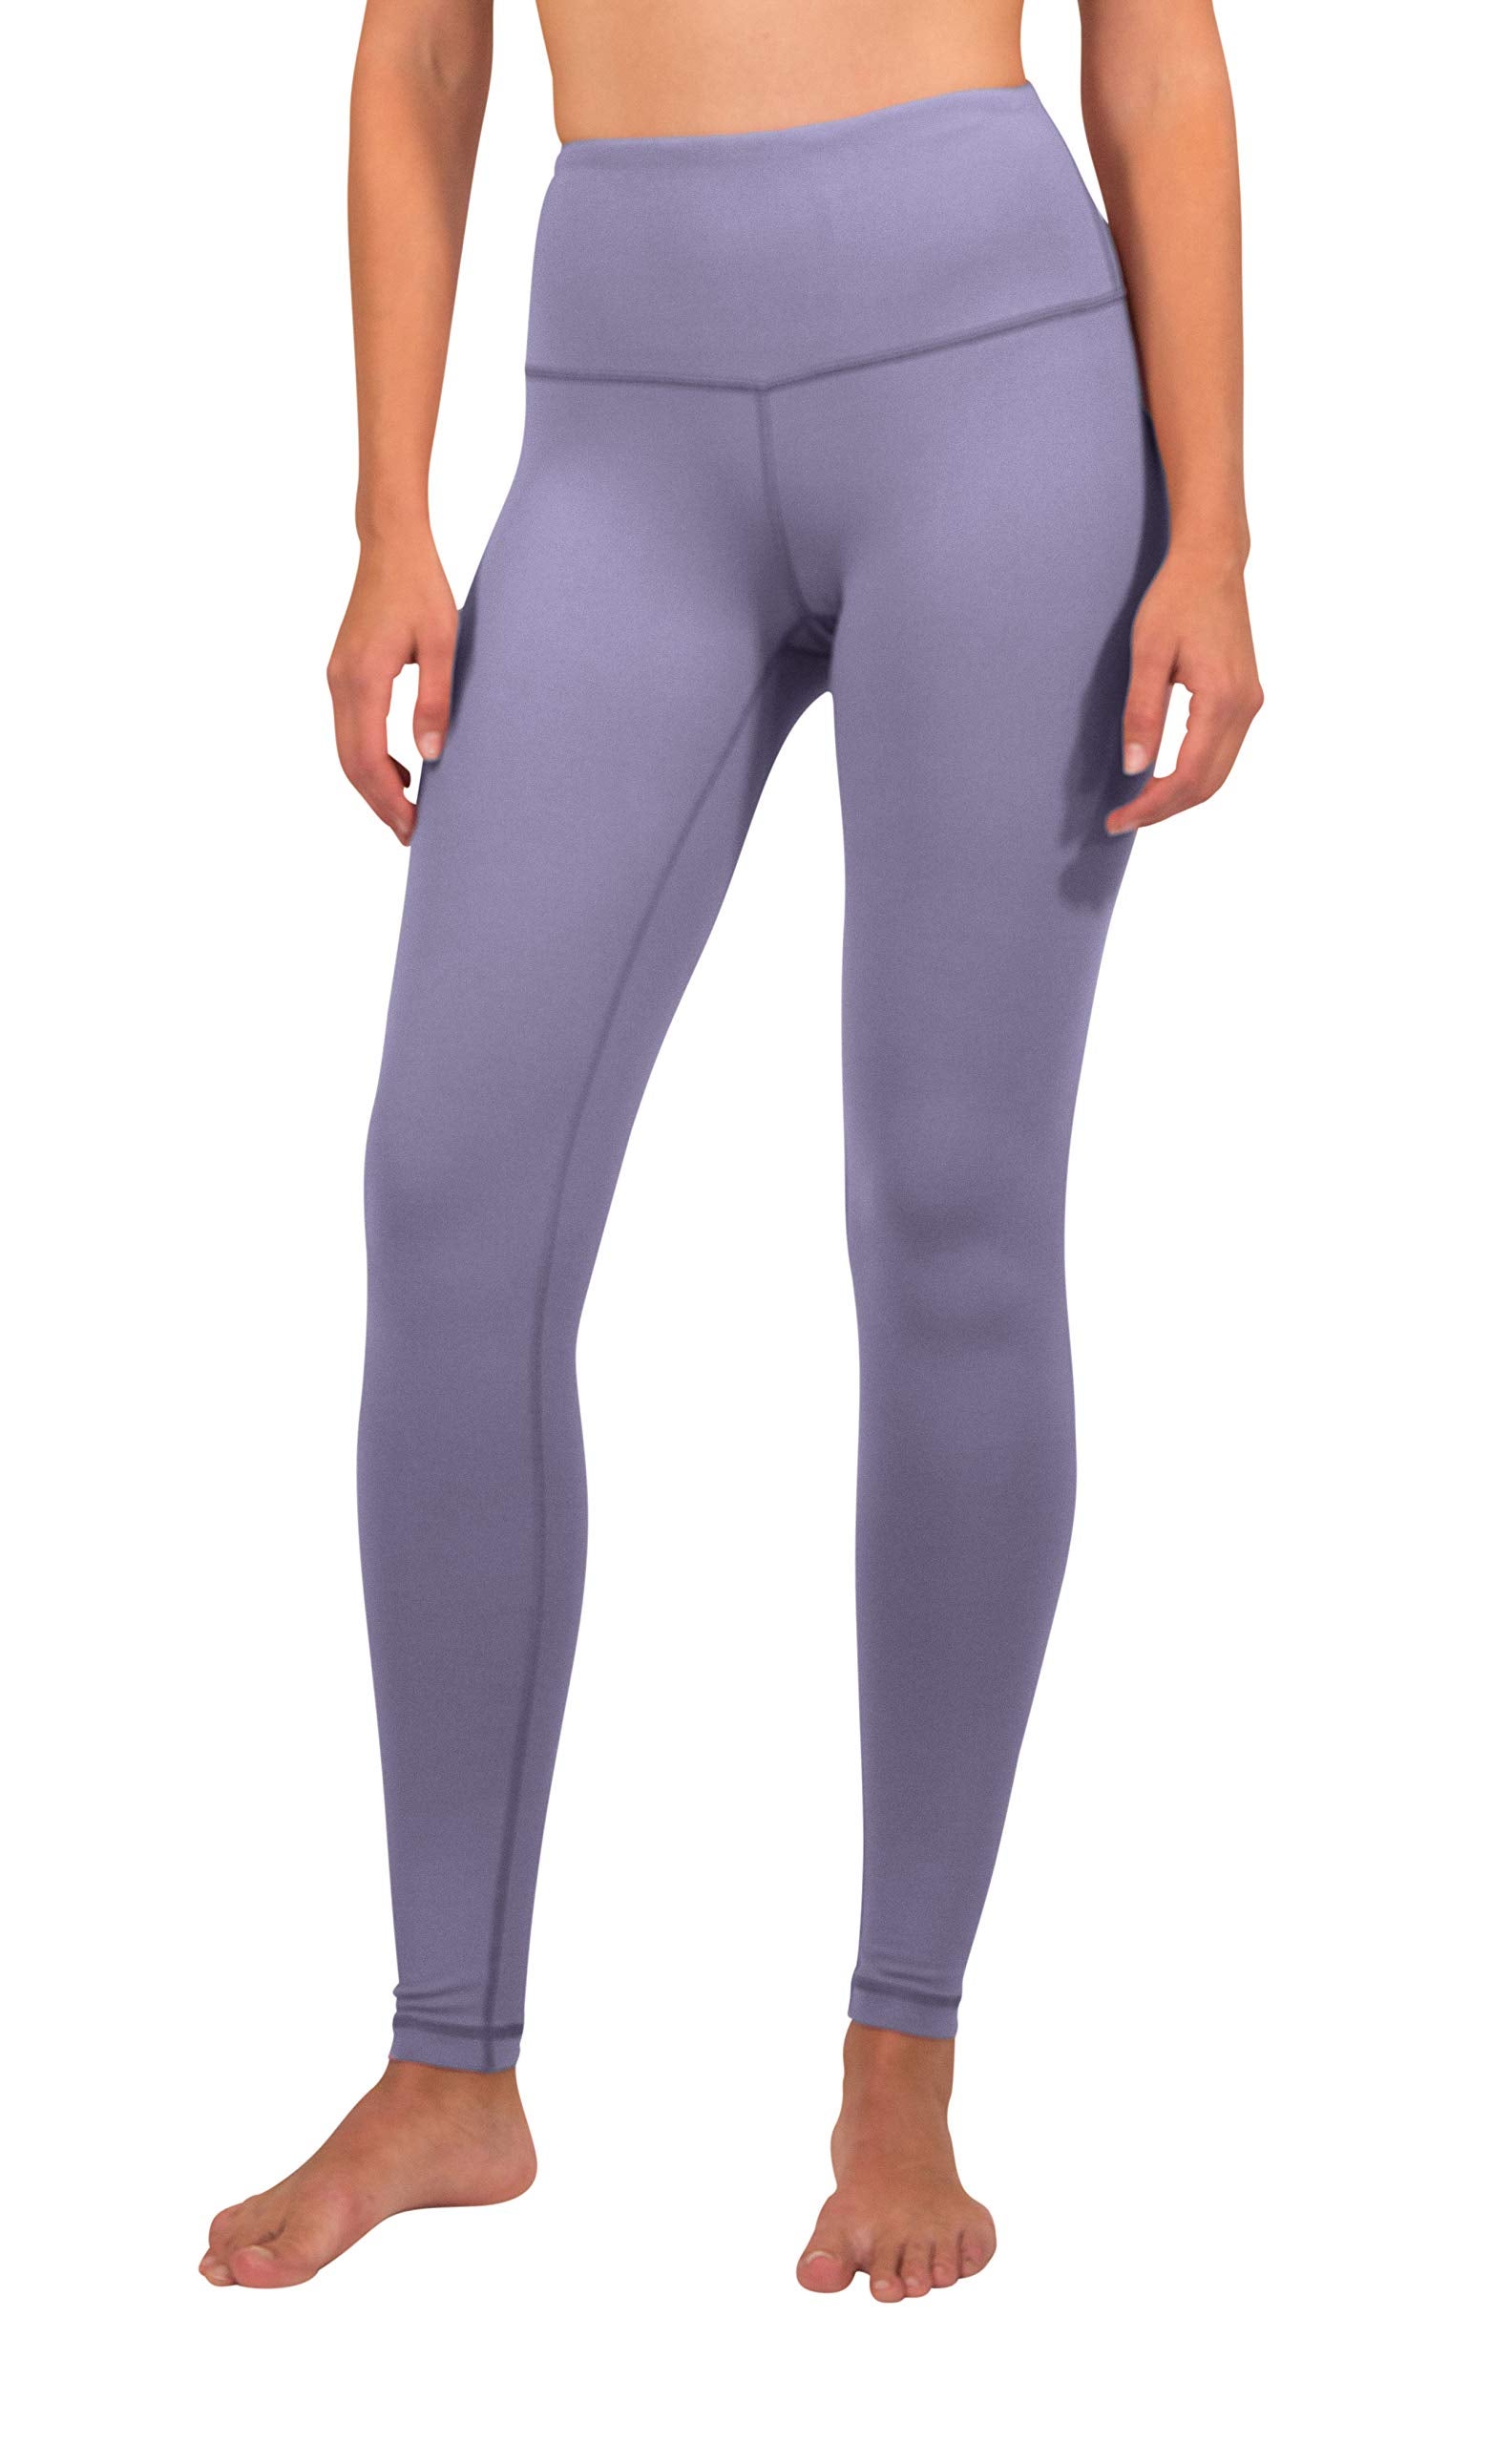 best inexpensive workout leggings